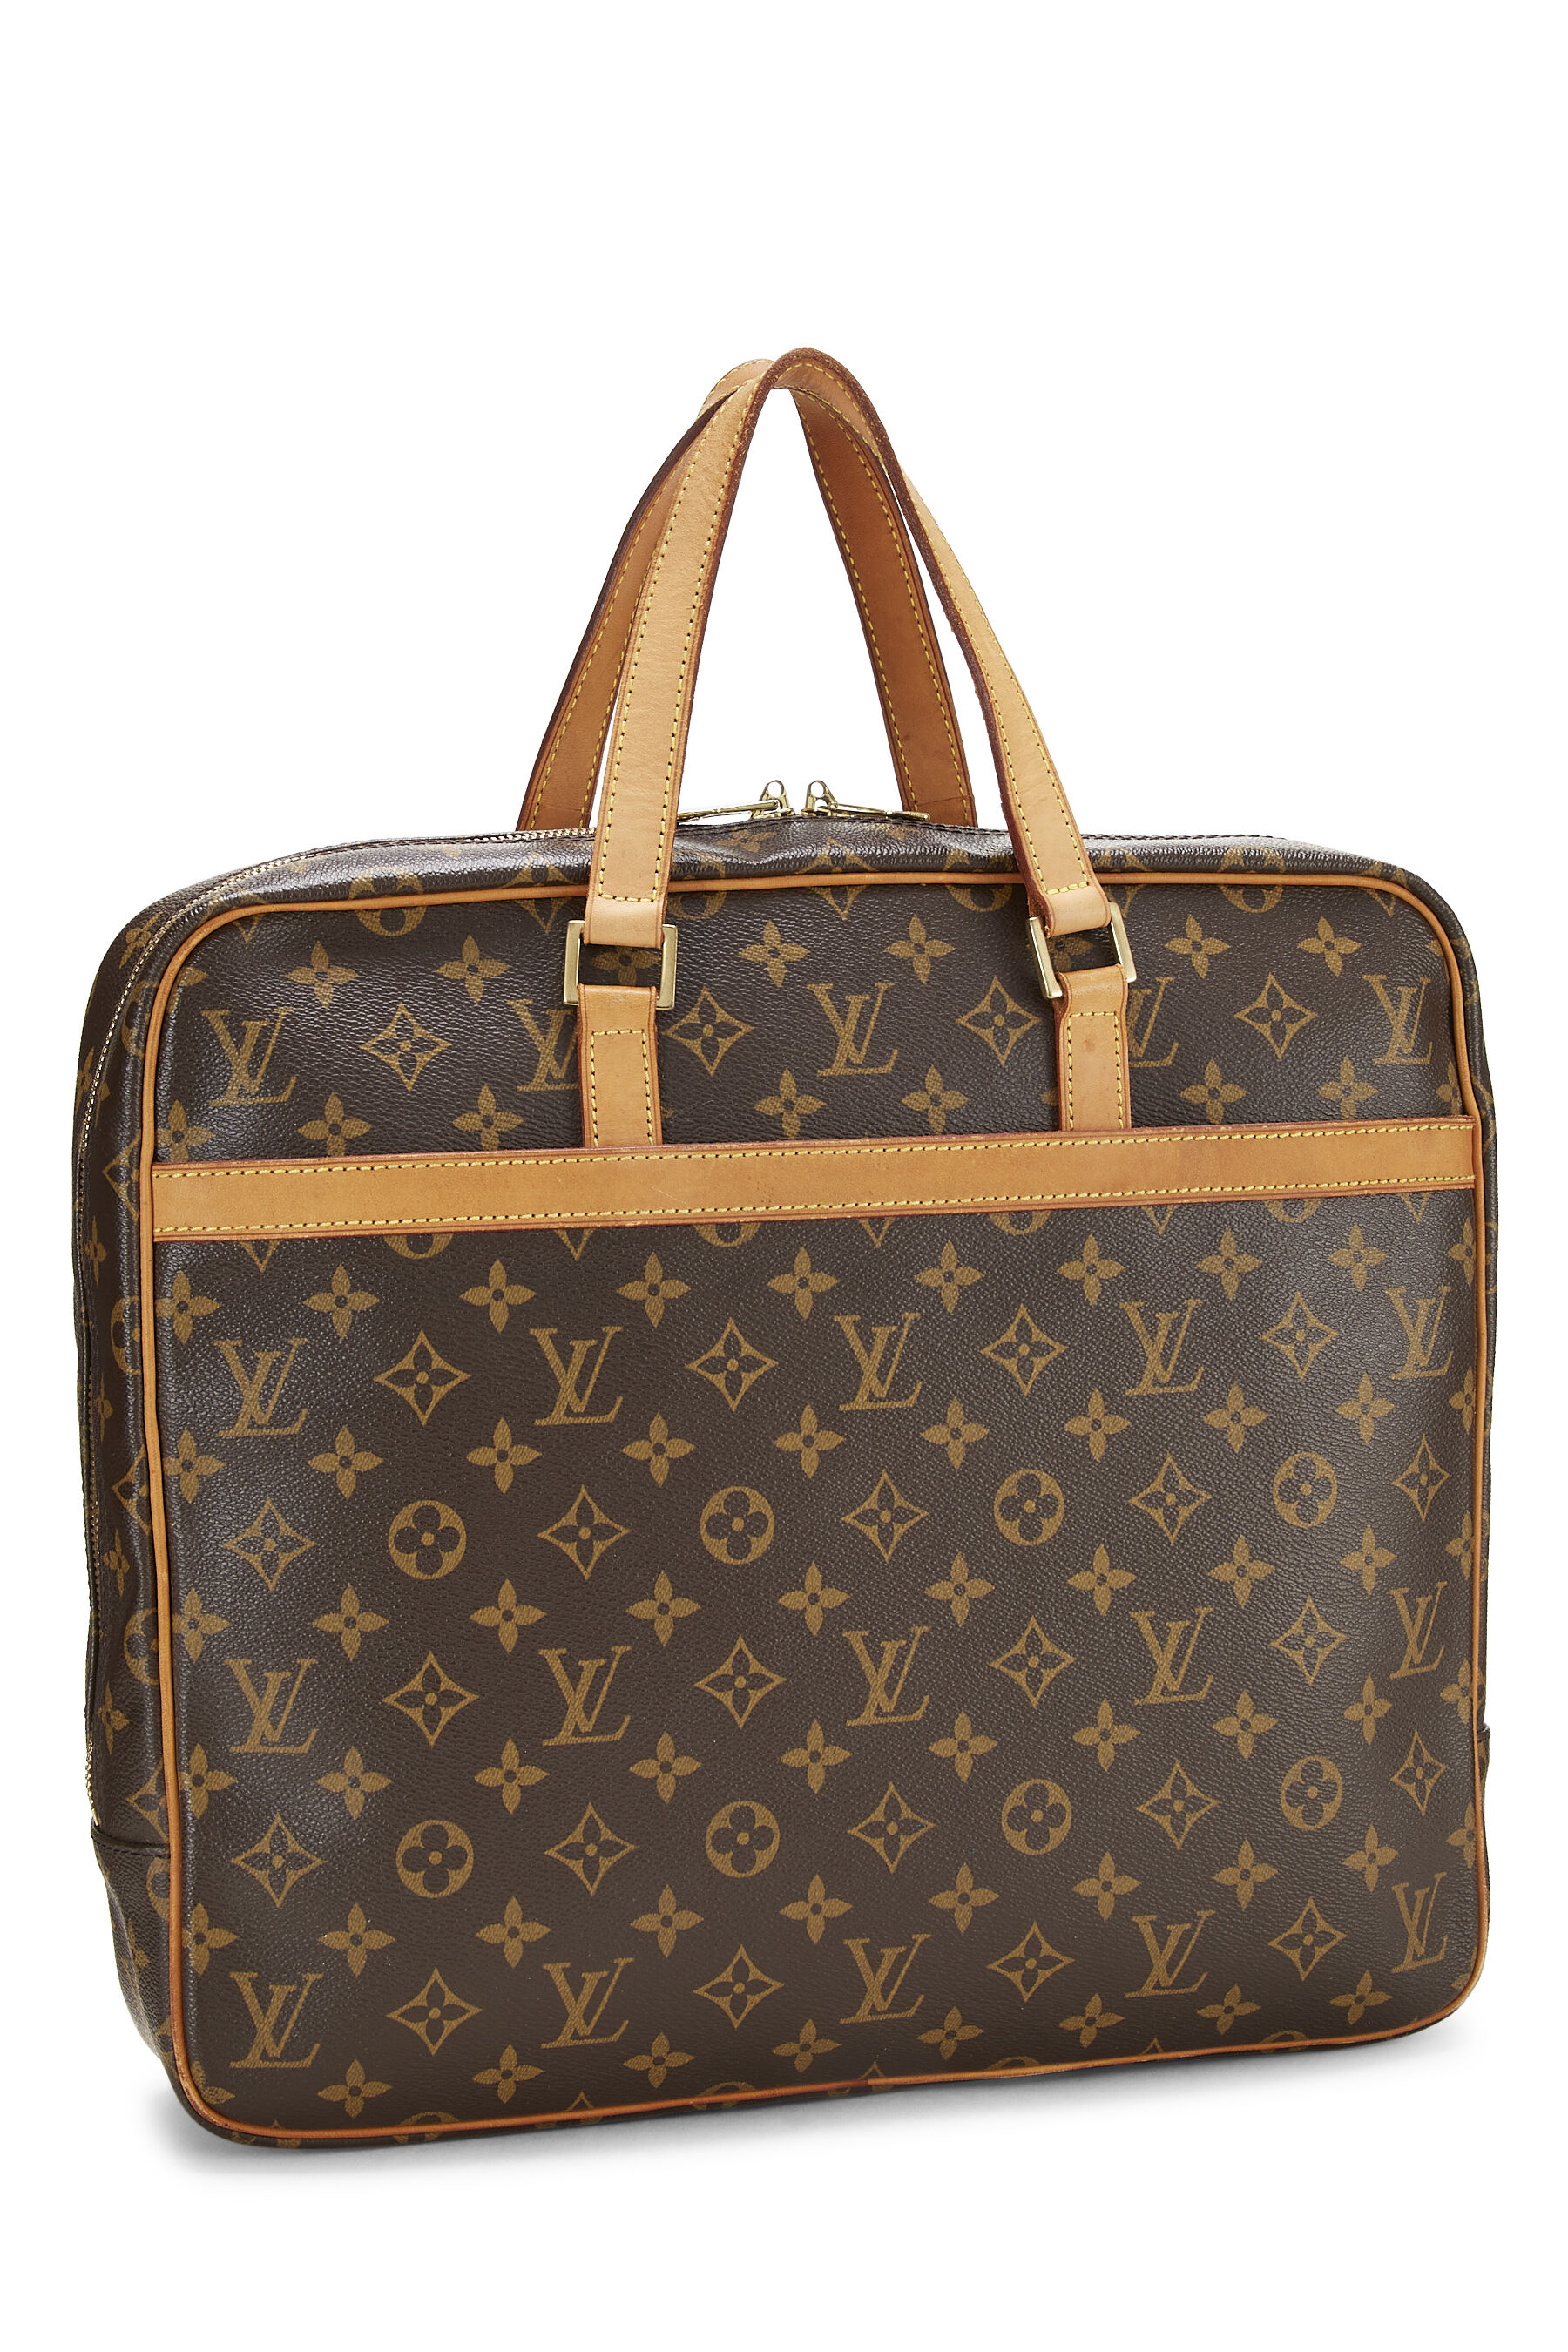 LOUIS VUITTON Coated Canvas and Vachetta Leather Porte Documents